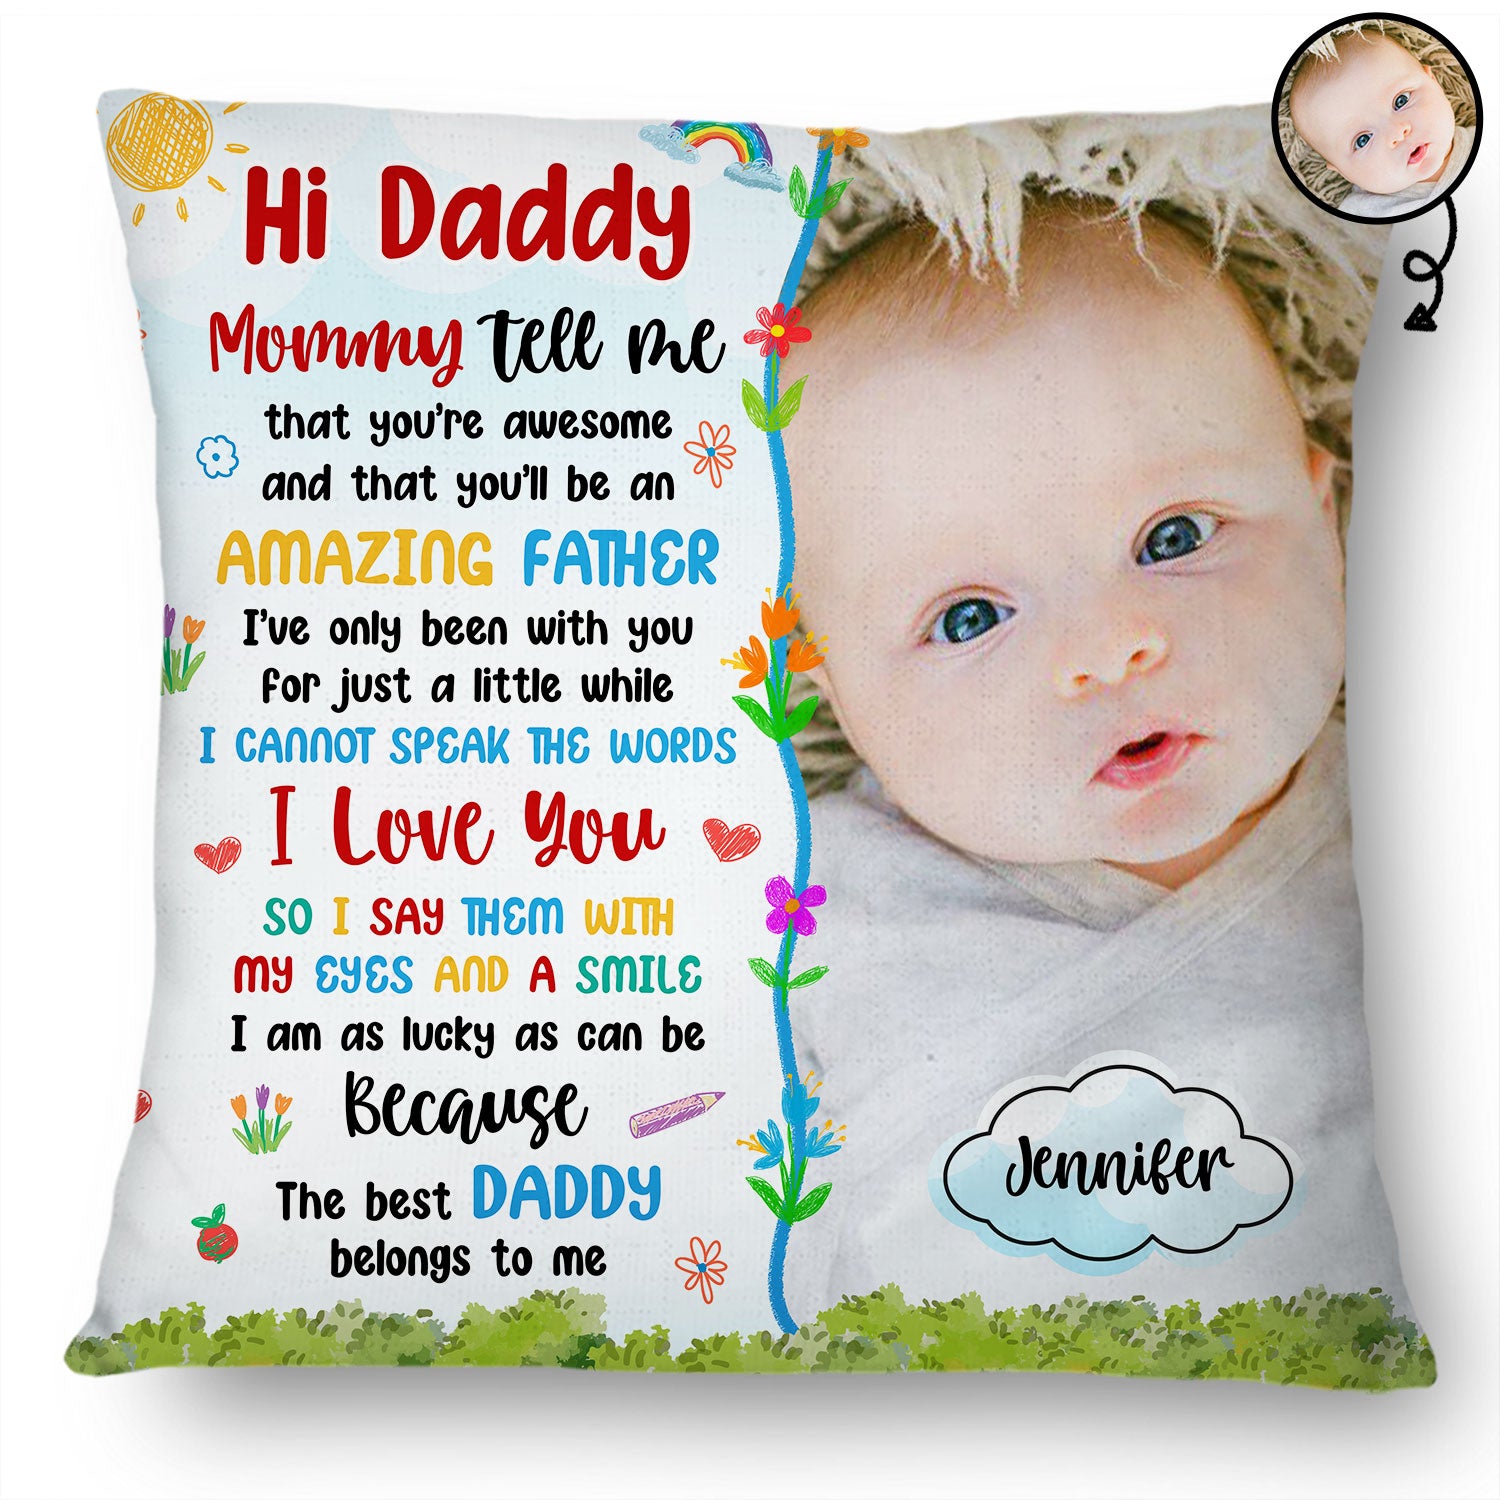 Custom Photo The Best Daddy Belongs To Me - Gift For Father, Dad, New Dad - Personalized Pillow